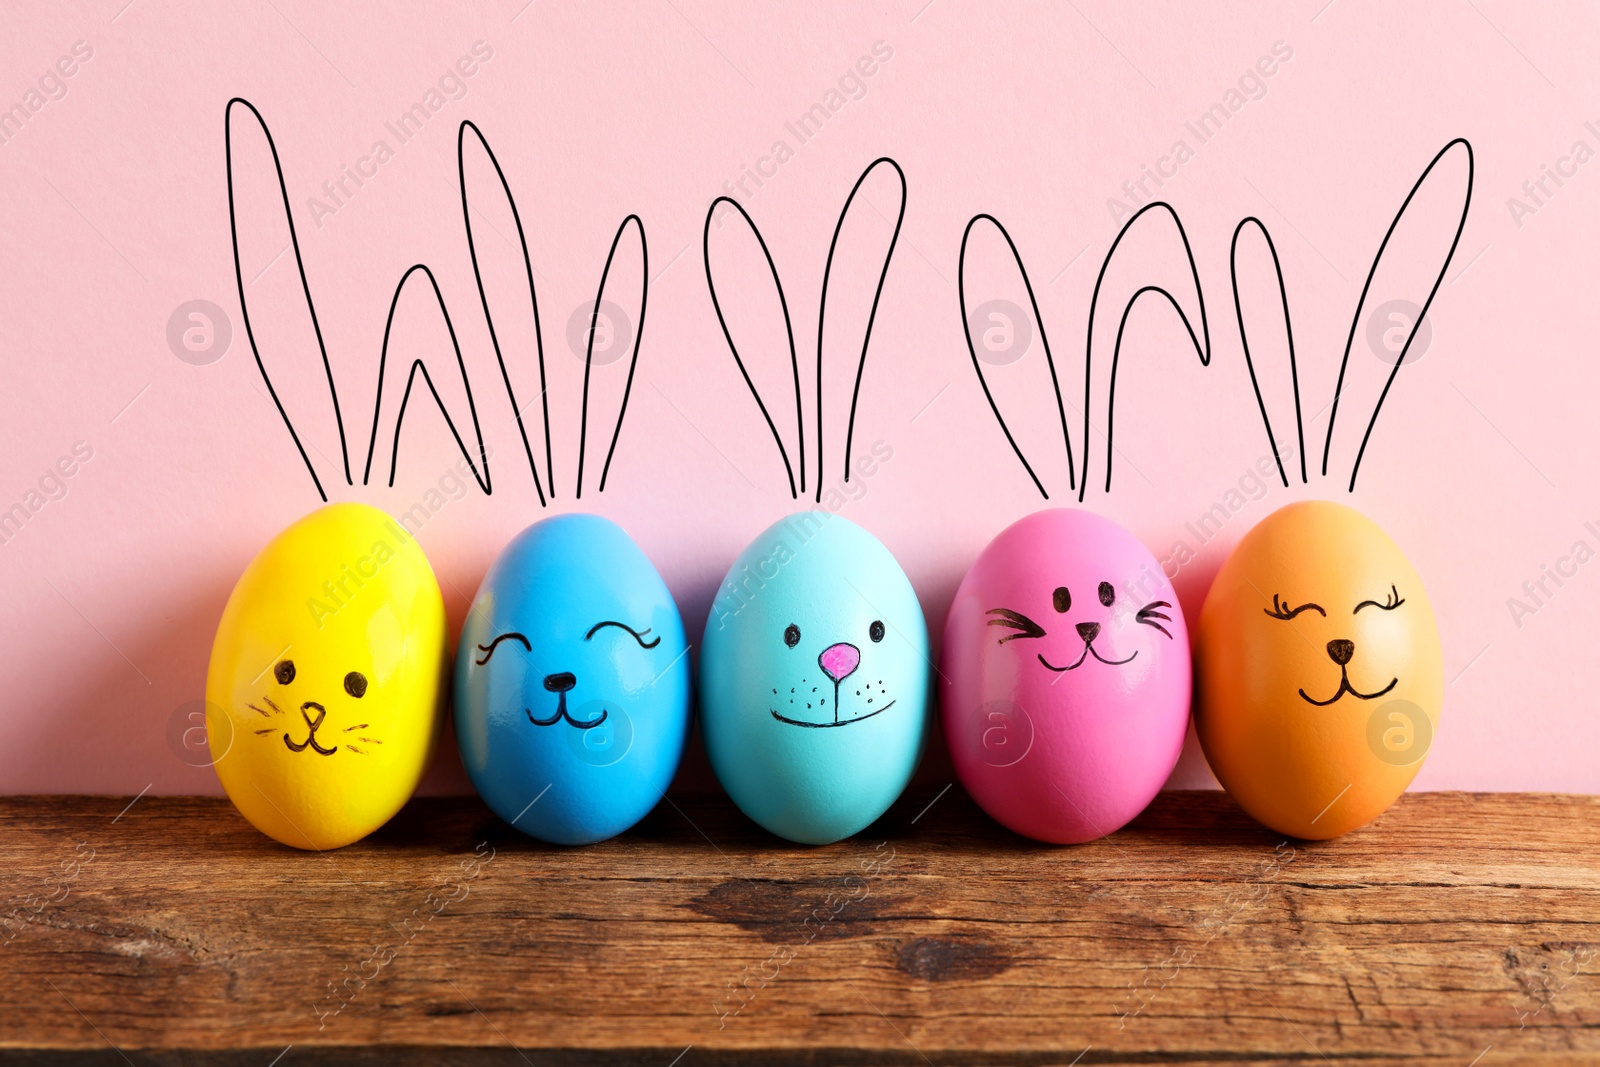 Image of Colorful eggs as Easter bunnies on wooden table against pink background